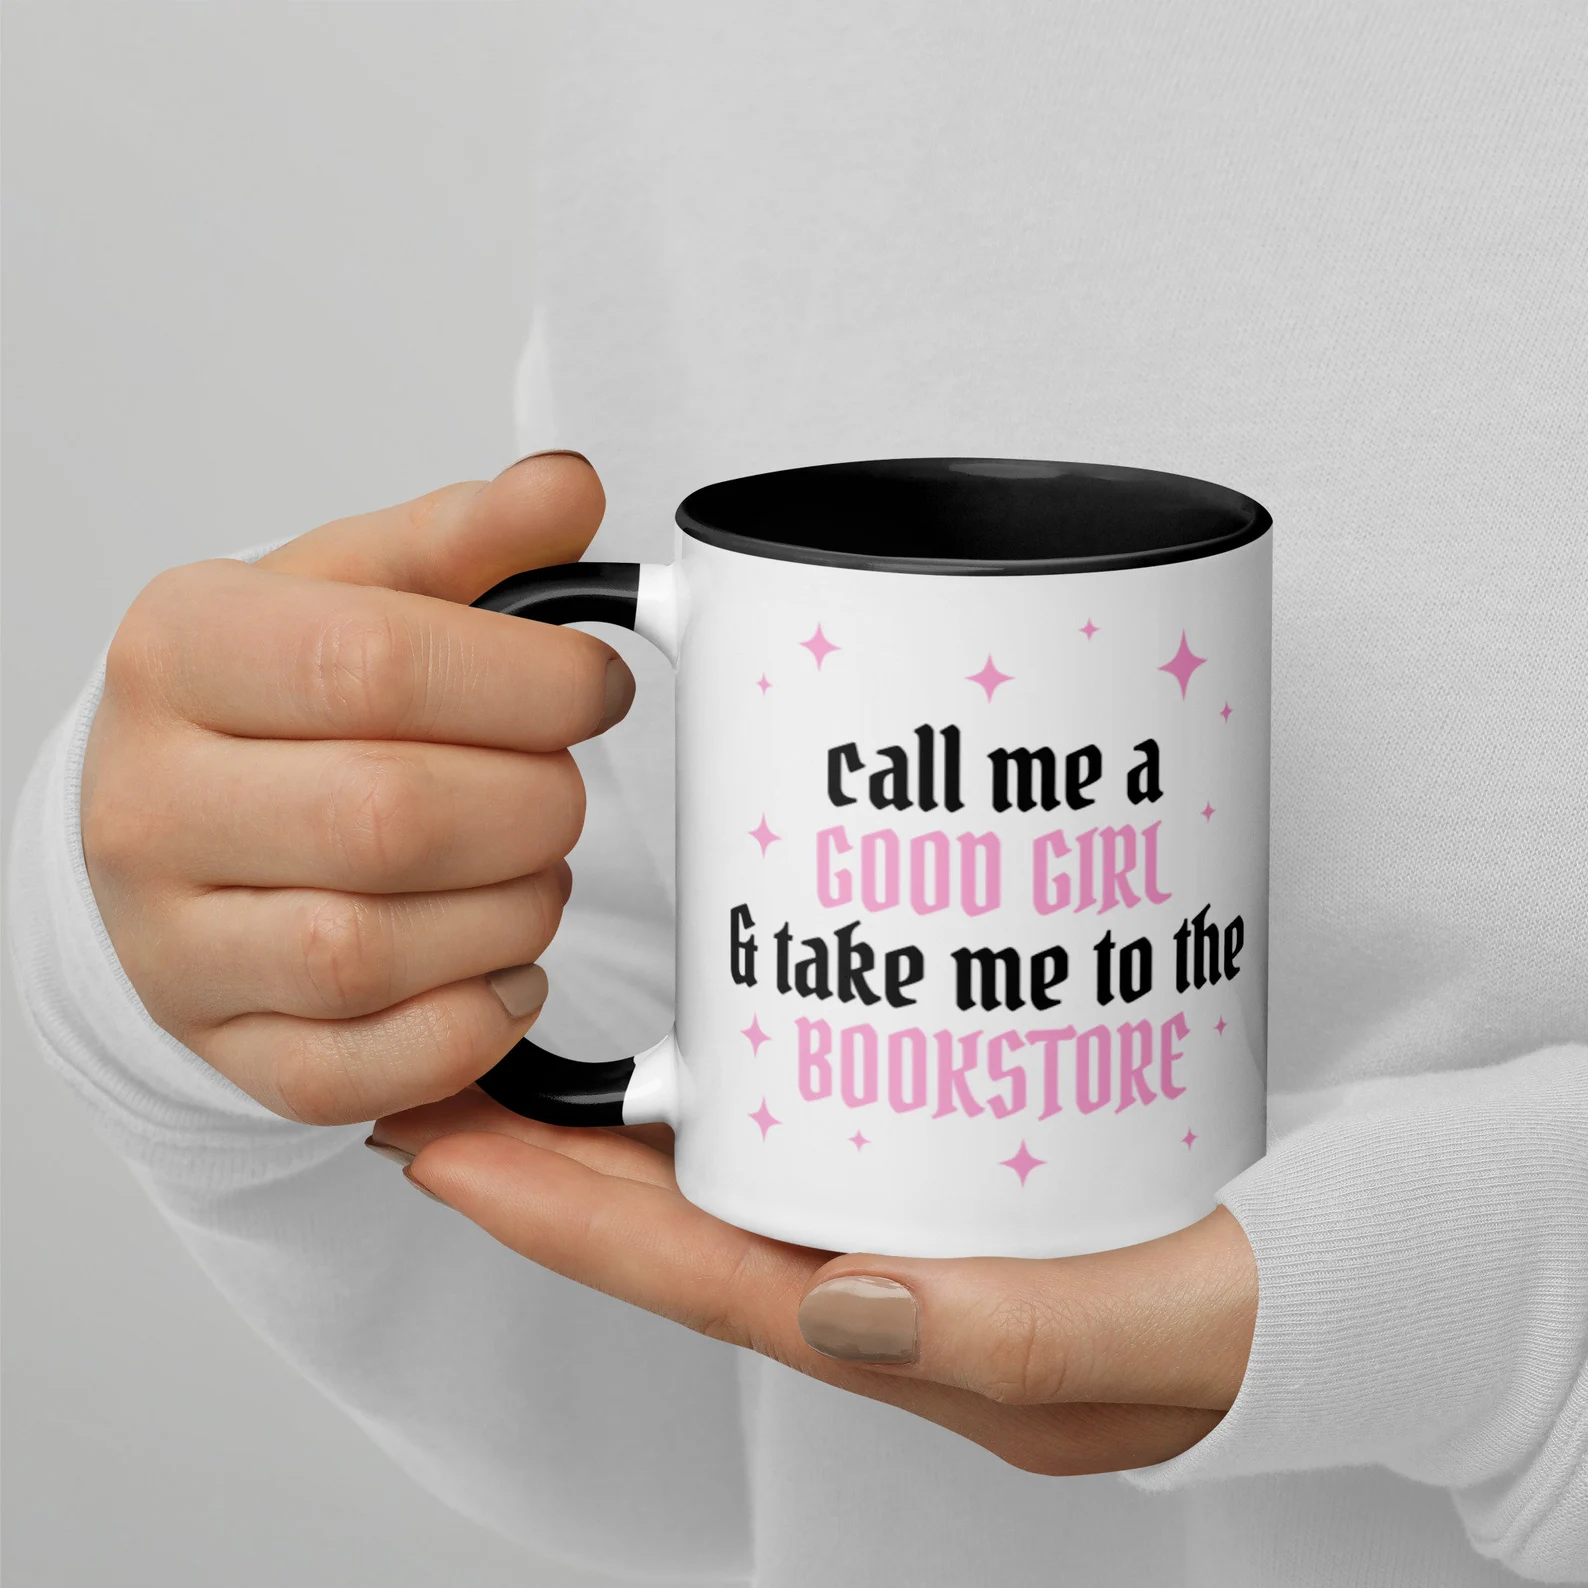 A black and white mug with pink text that reads "call me a good girl and take me to the bookstore"